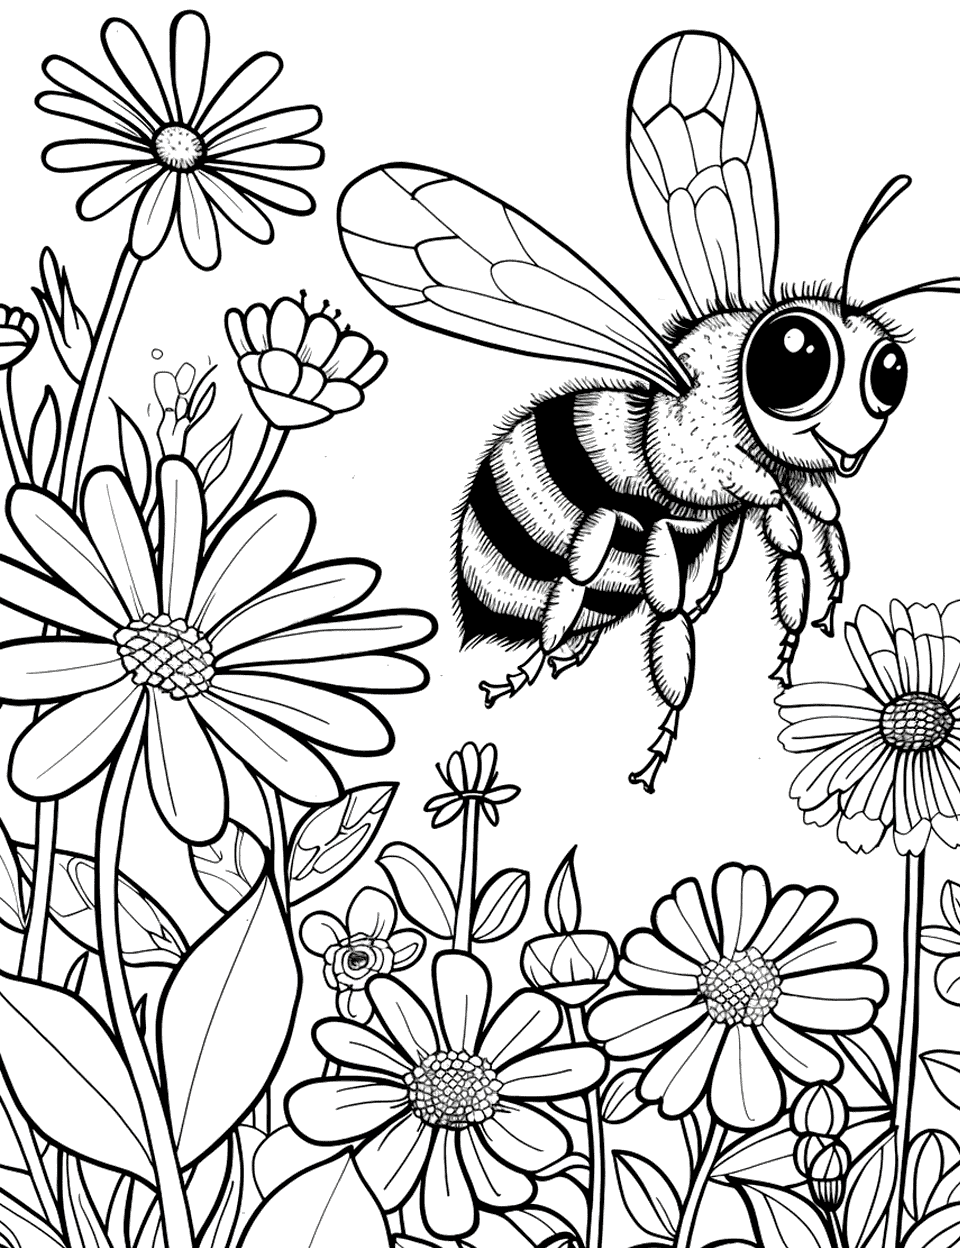 Busy Bee Over Garden Coloring Page - A bee flying over a garden filled with a variety of flowers.